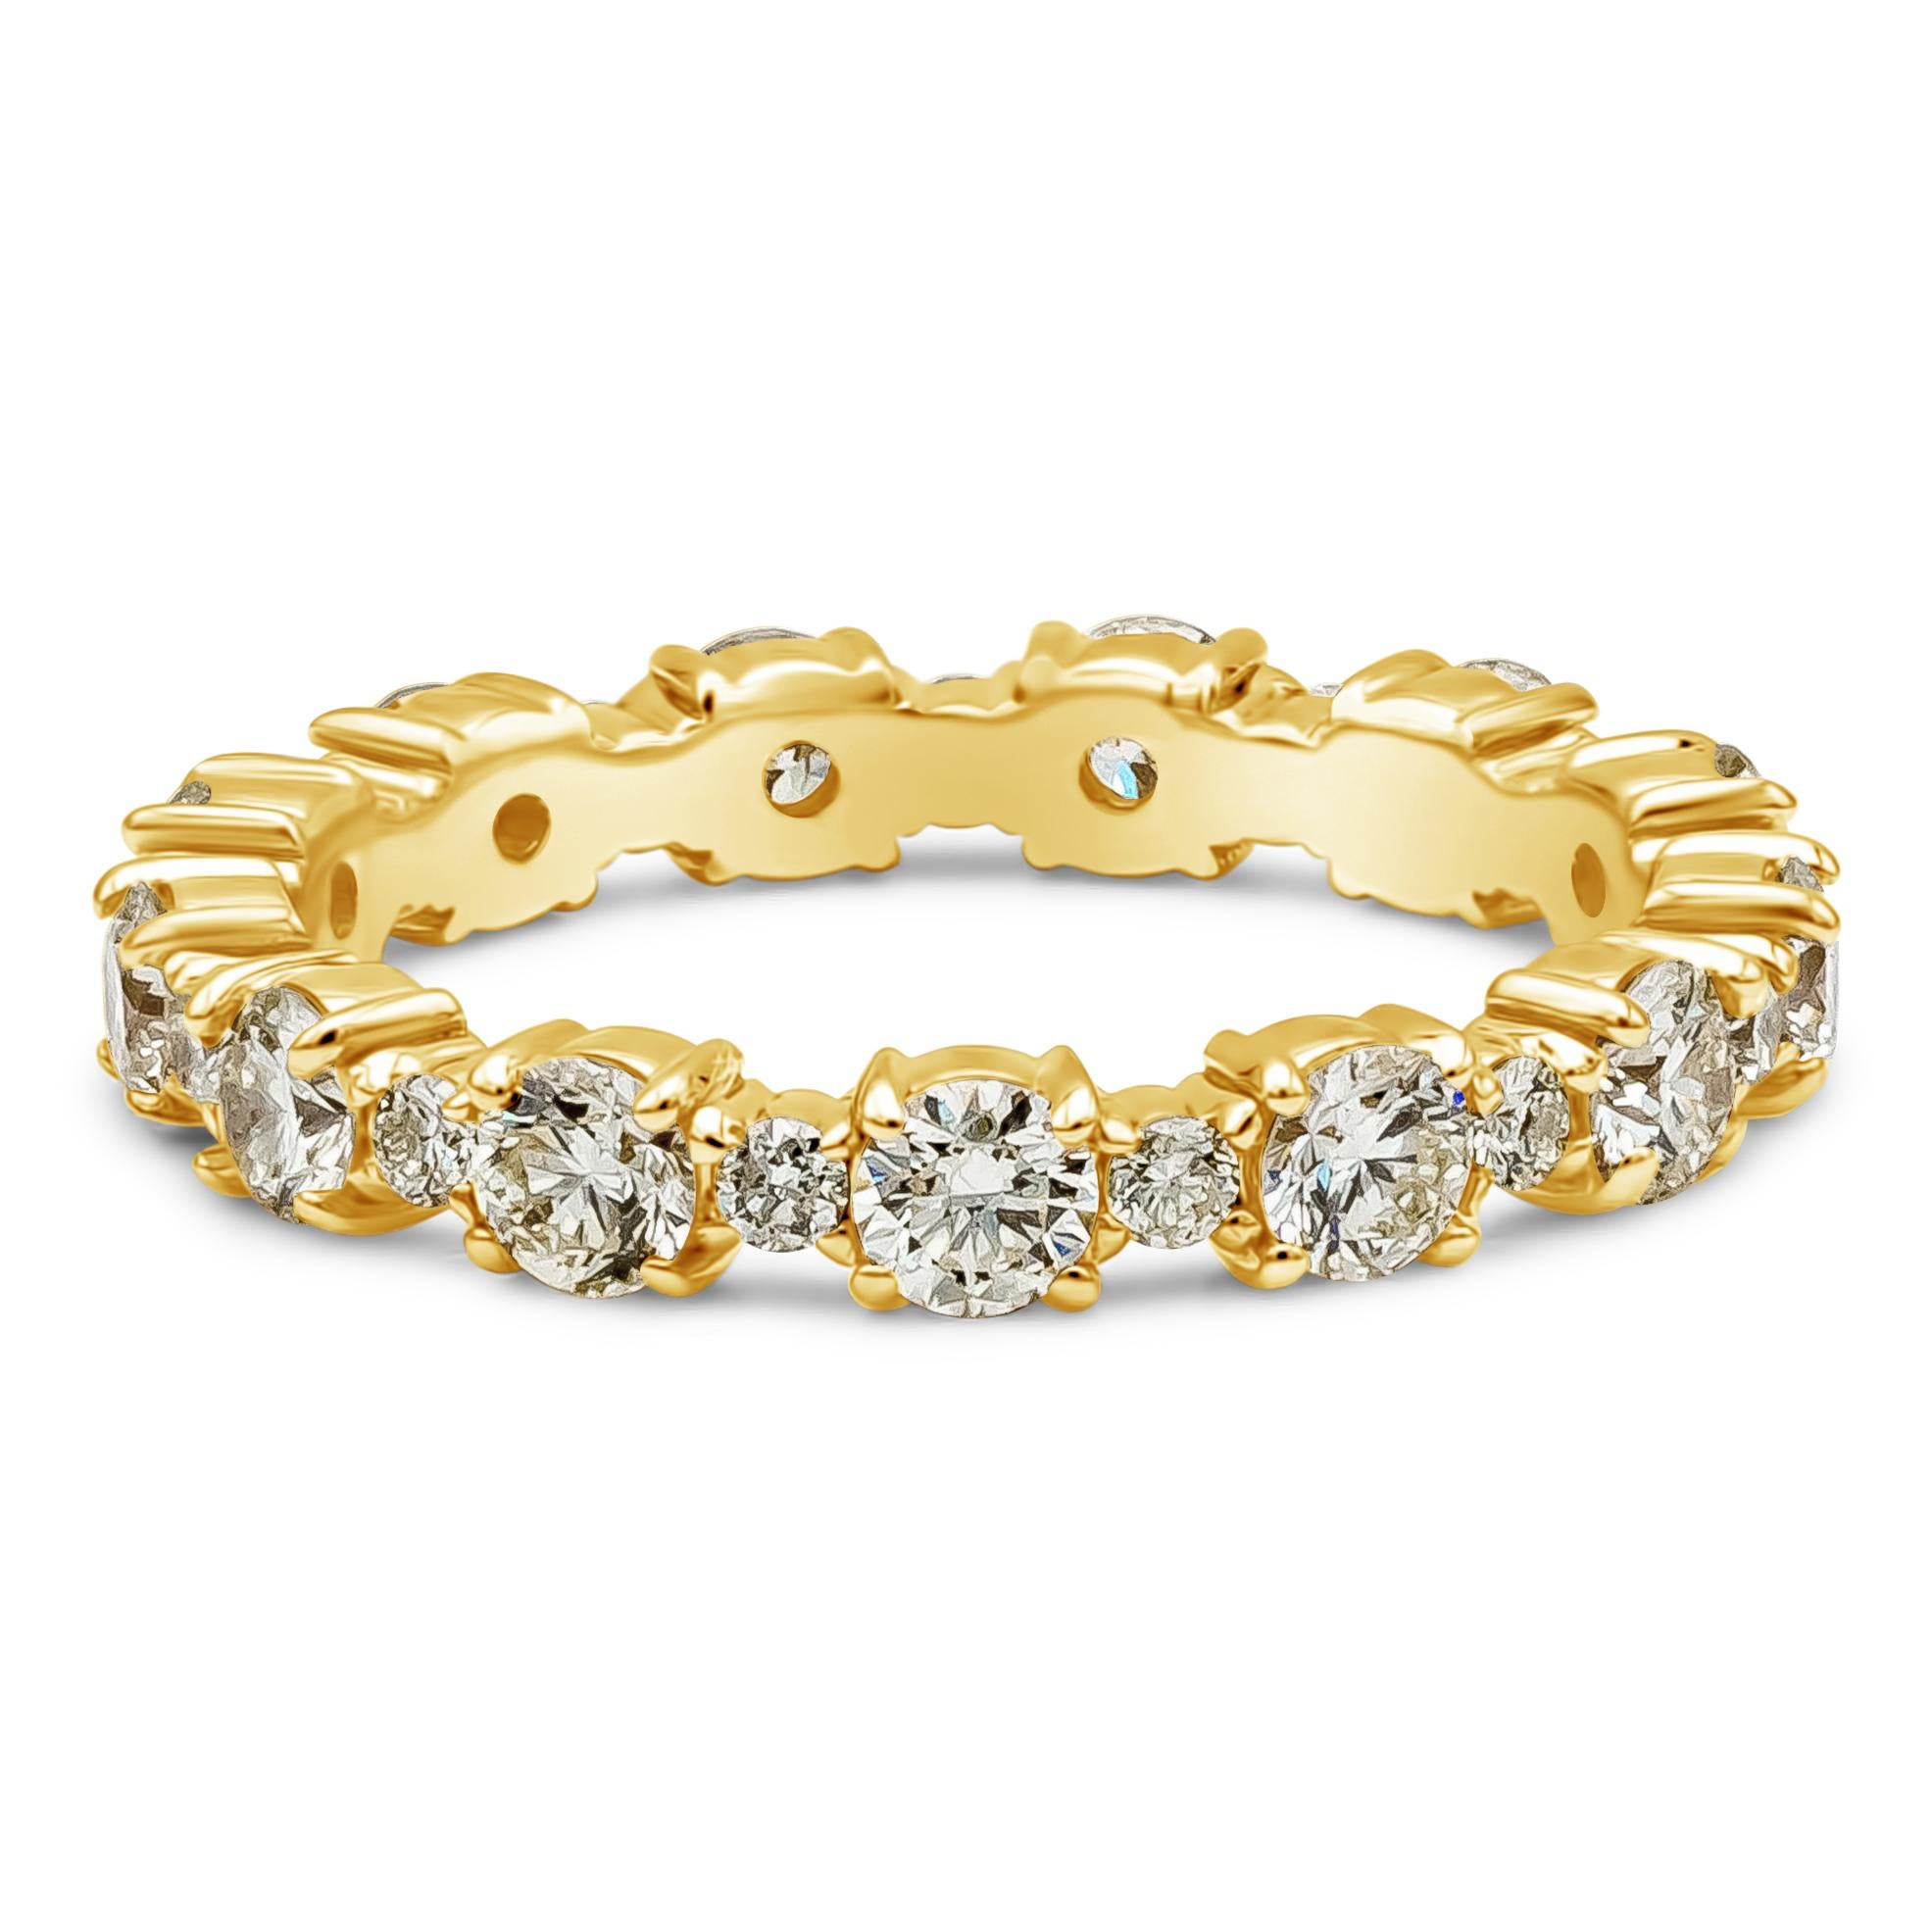 A classic and timeless wedding band style showcasing a row of round brilliant cut diamonds weighing 1.23 carats total, O-P Color and VS in Clarity. Alternating in between is a small round diamond, Eternity set. Made with 14K Yellow Gold. Size 4.5